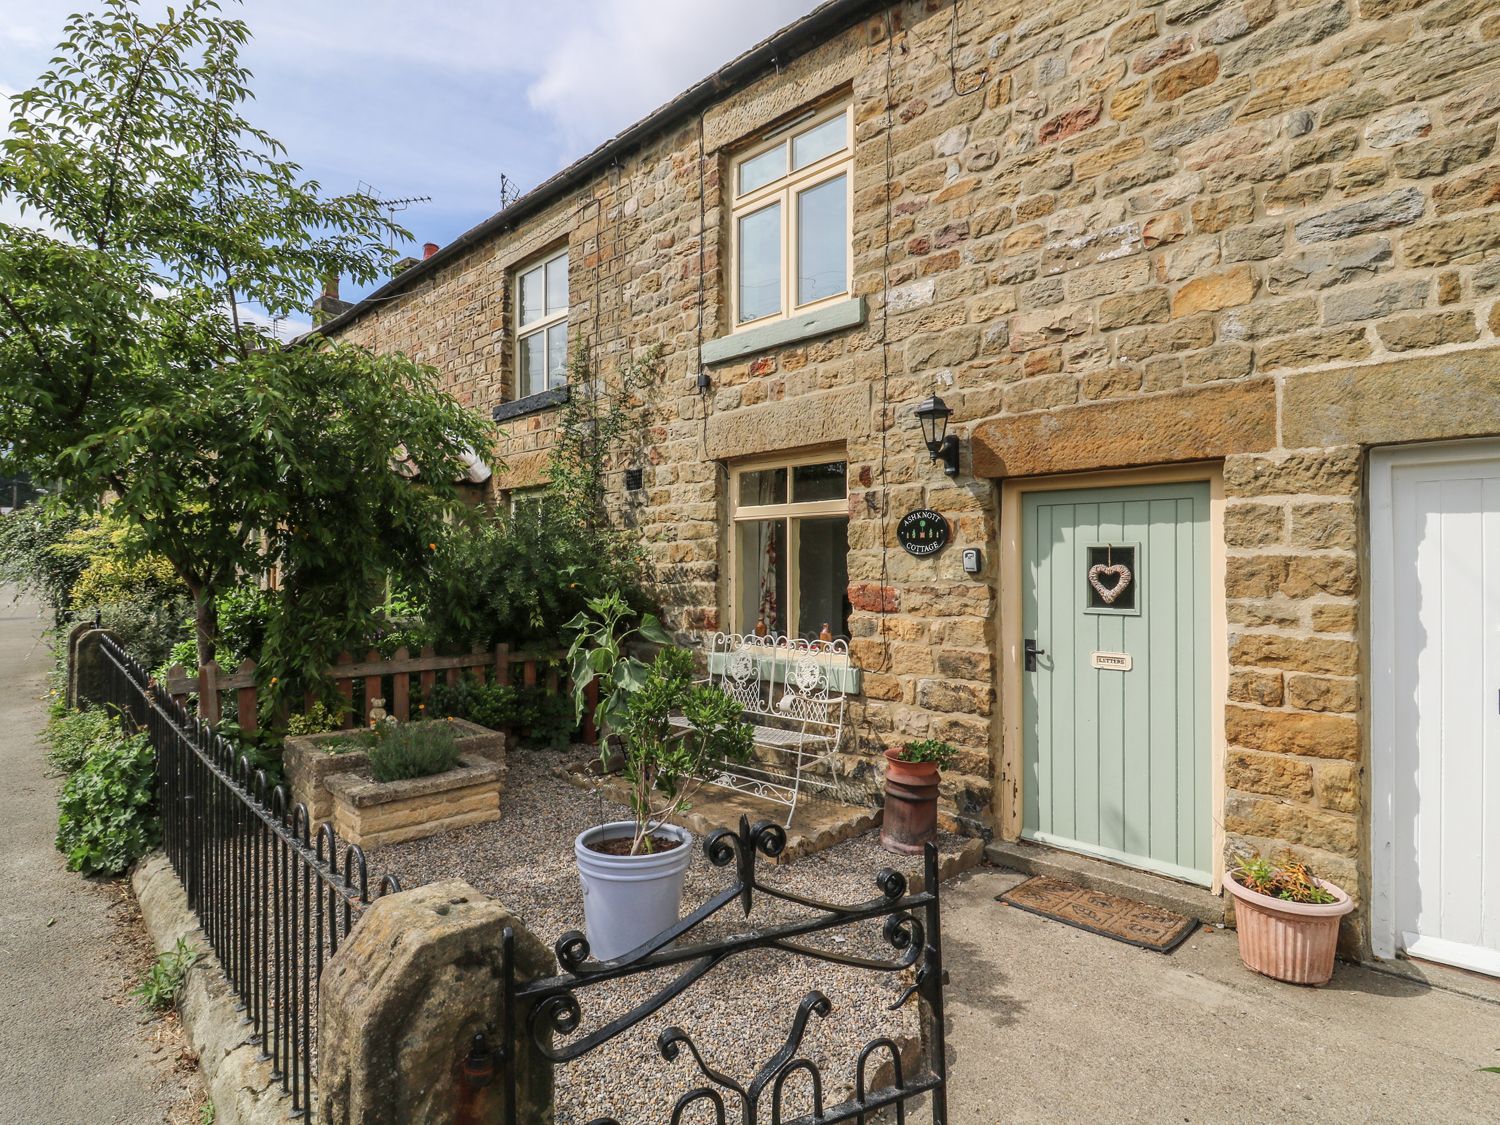 Holiday Cottages To Rent In The Yorkshire Dales Last Minute Cottages